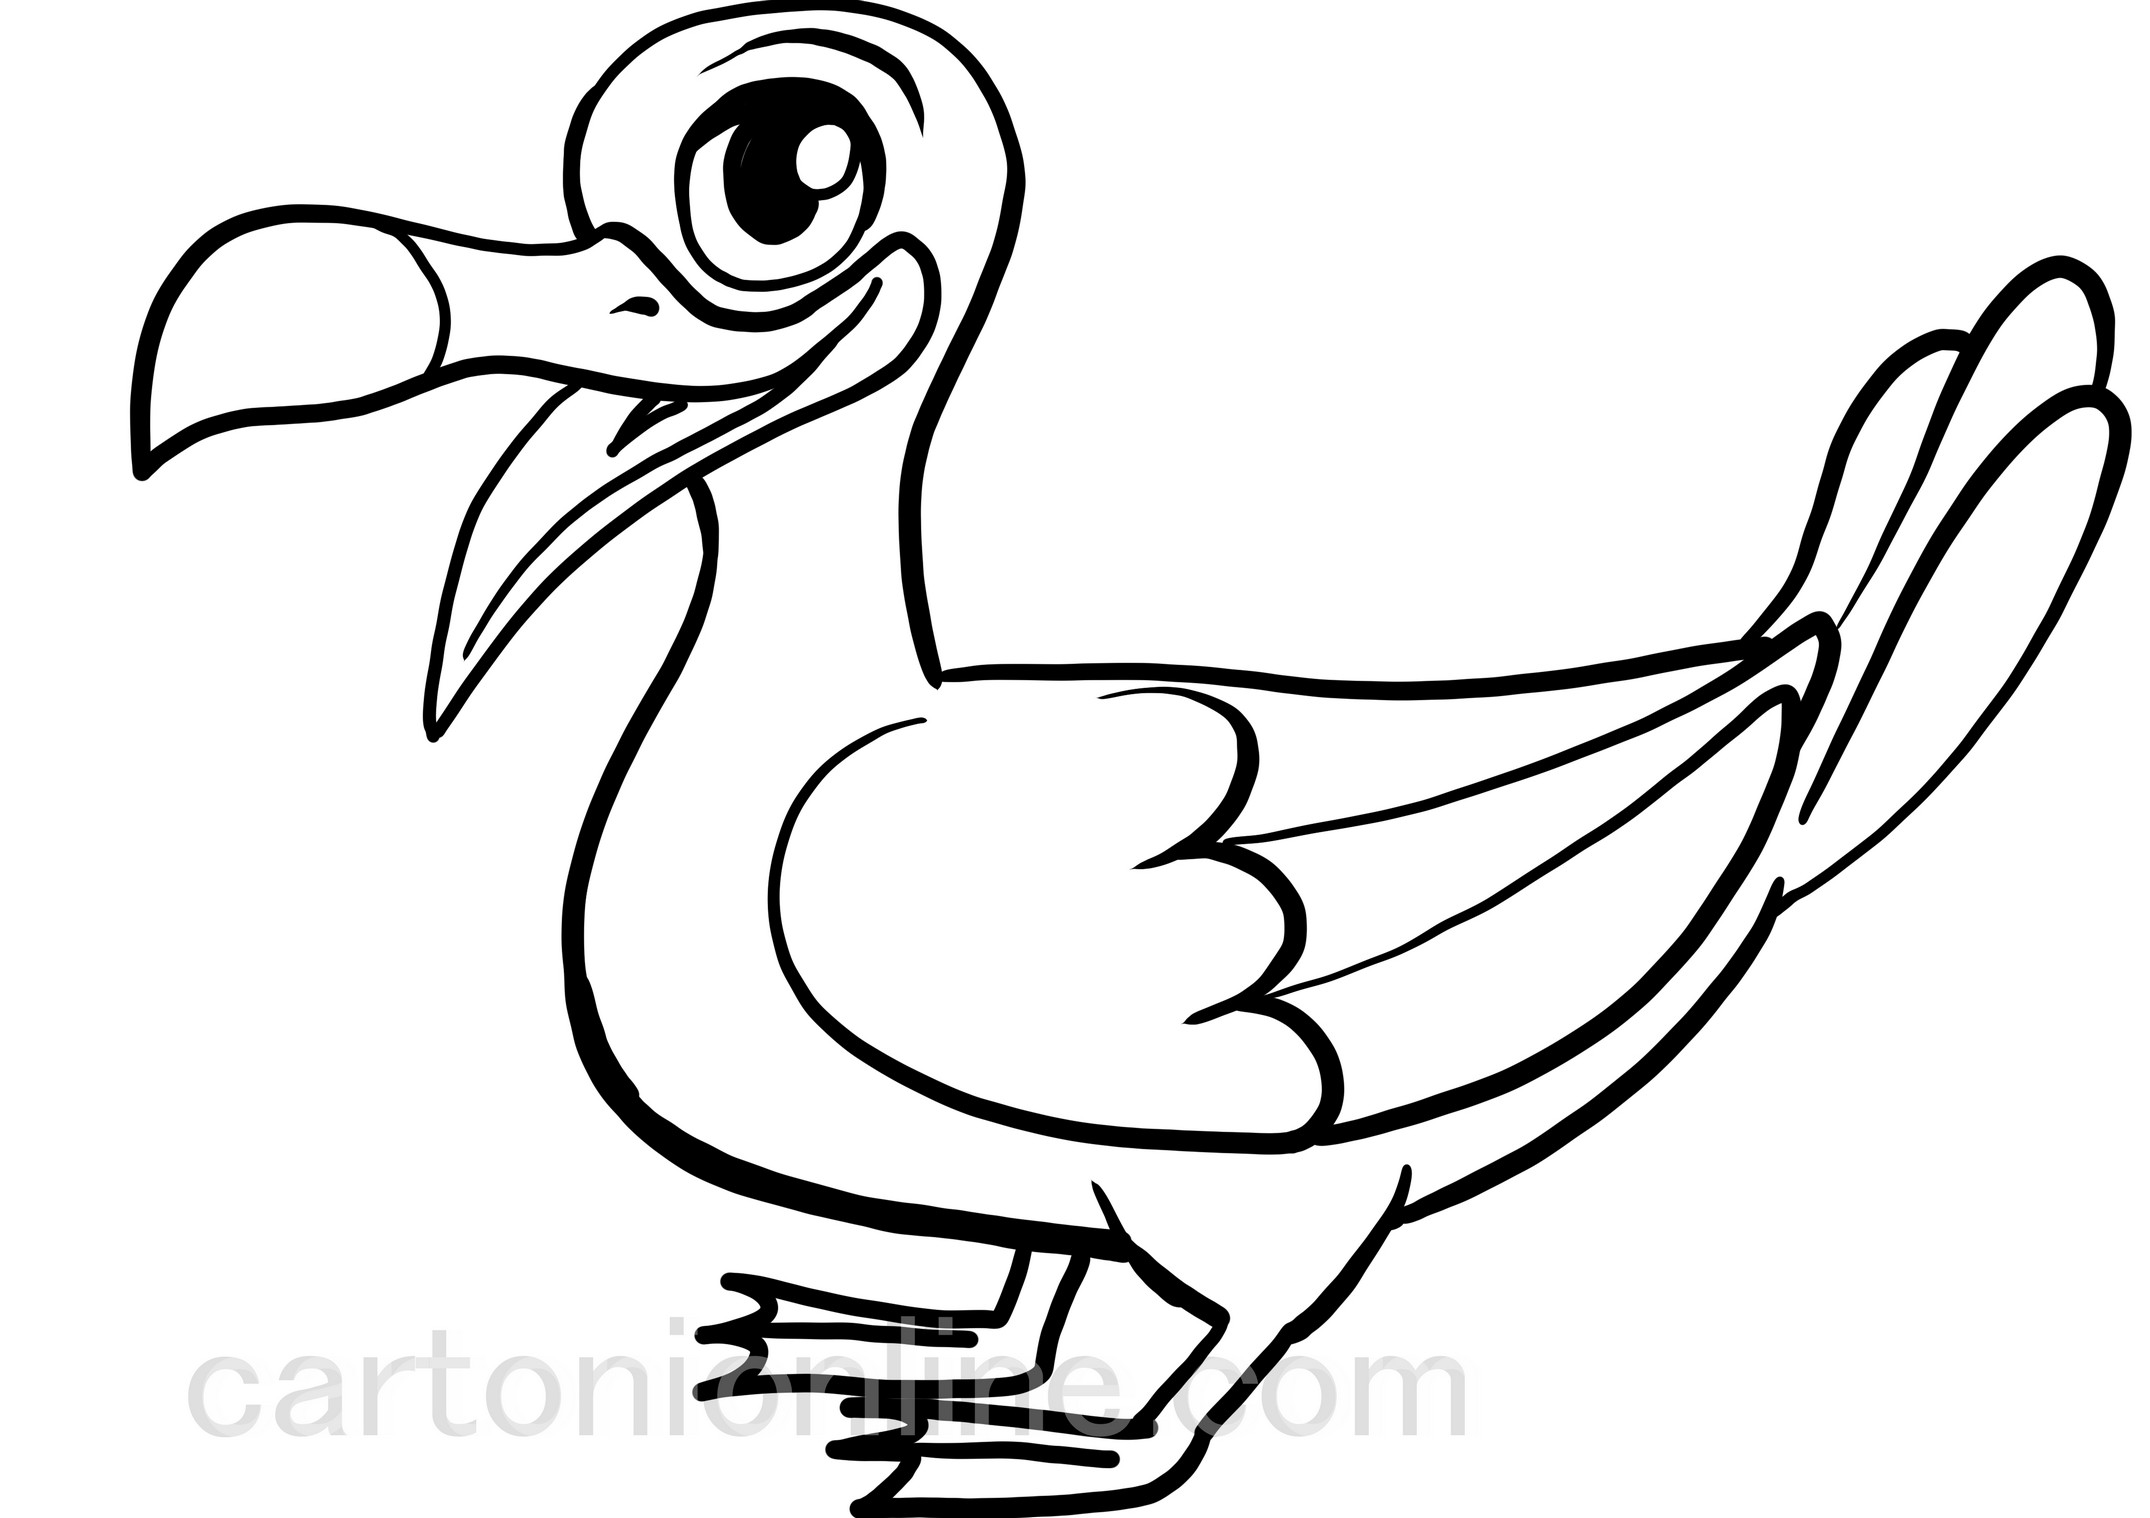 Coloring page of albatross cartoon style